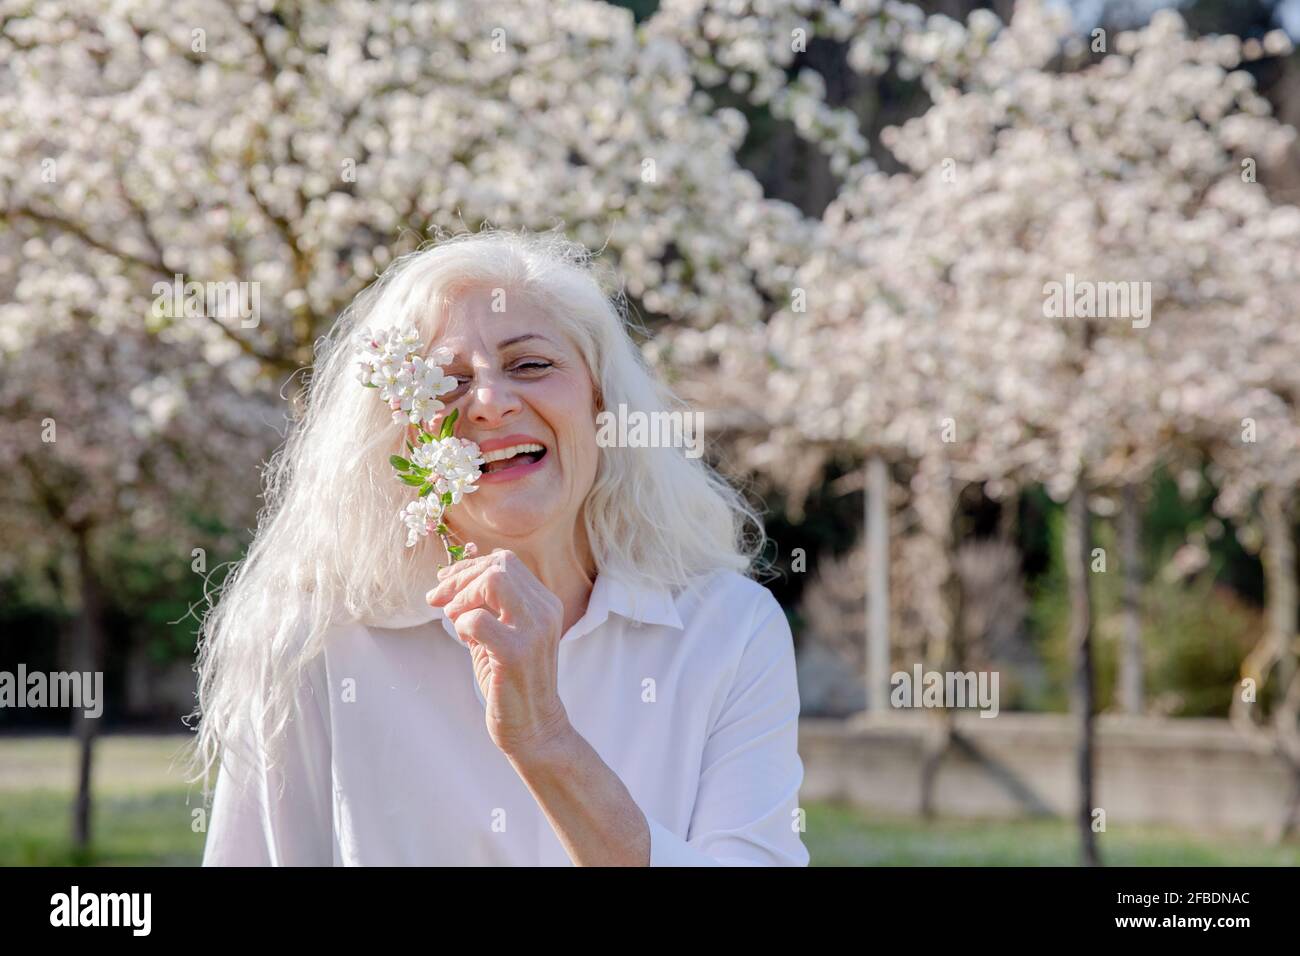 Smiling woman holding white flowers while standing at park Stock Photo